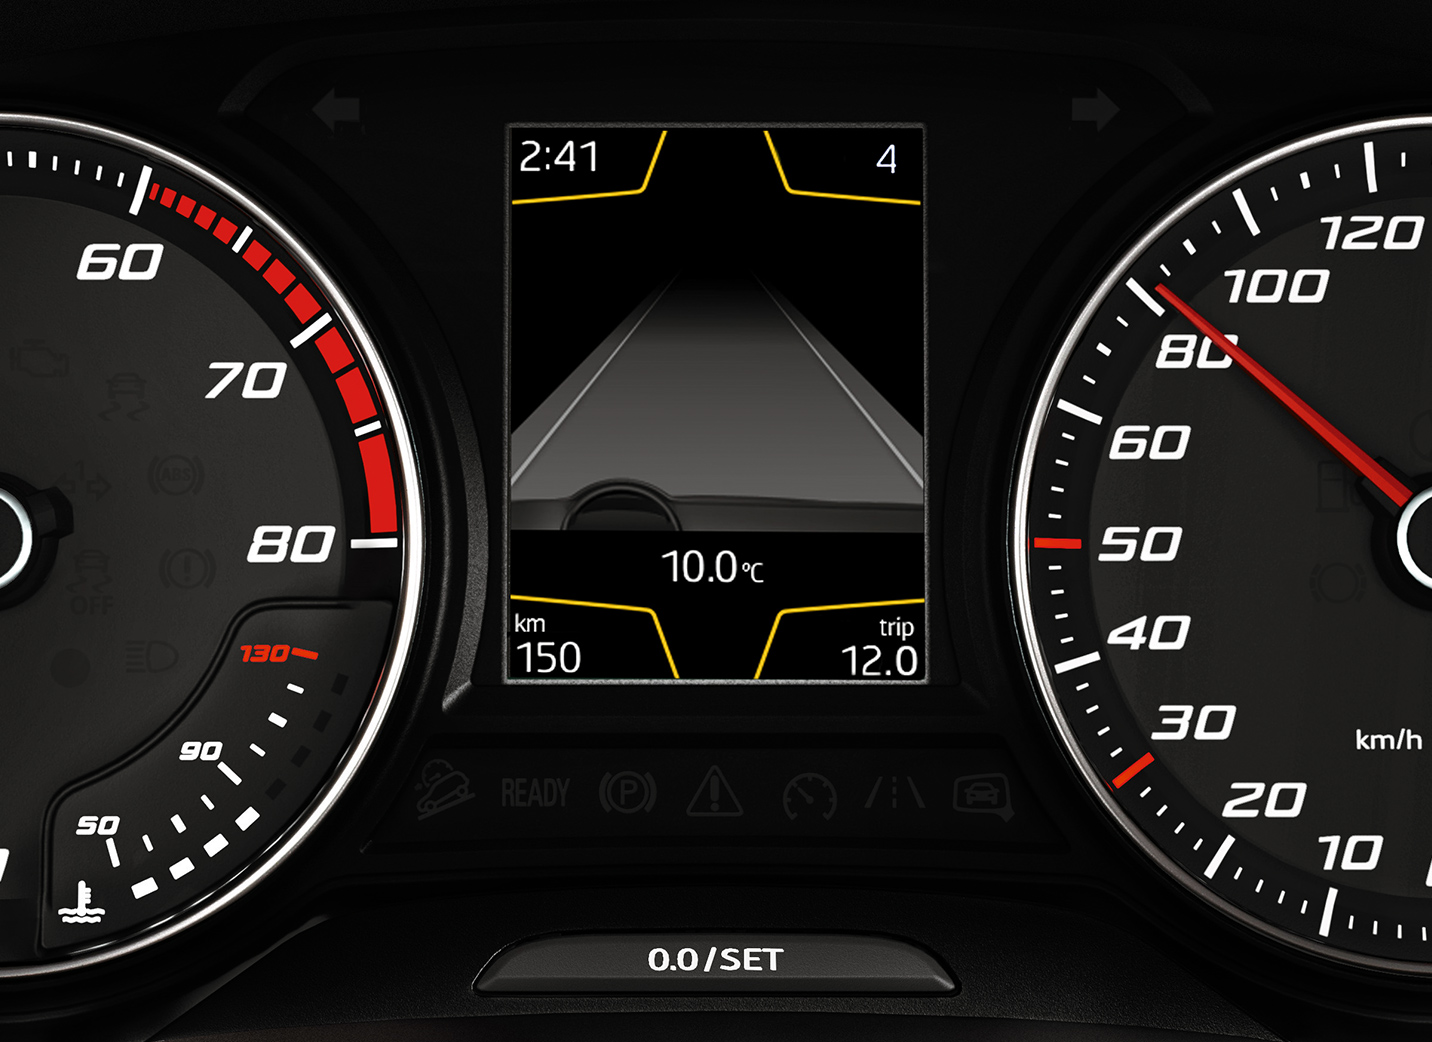 SEAT Leon Lane Assist safety feature